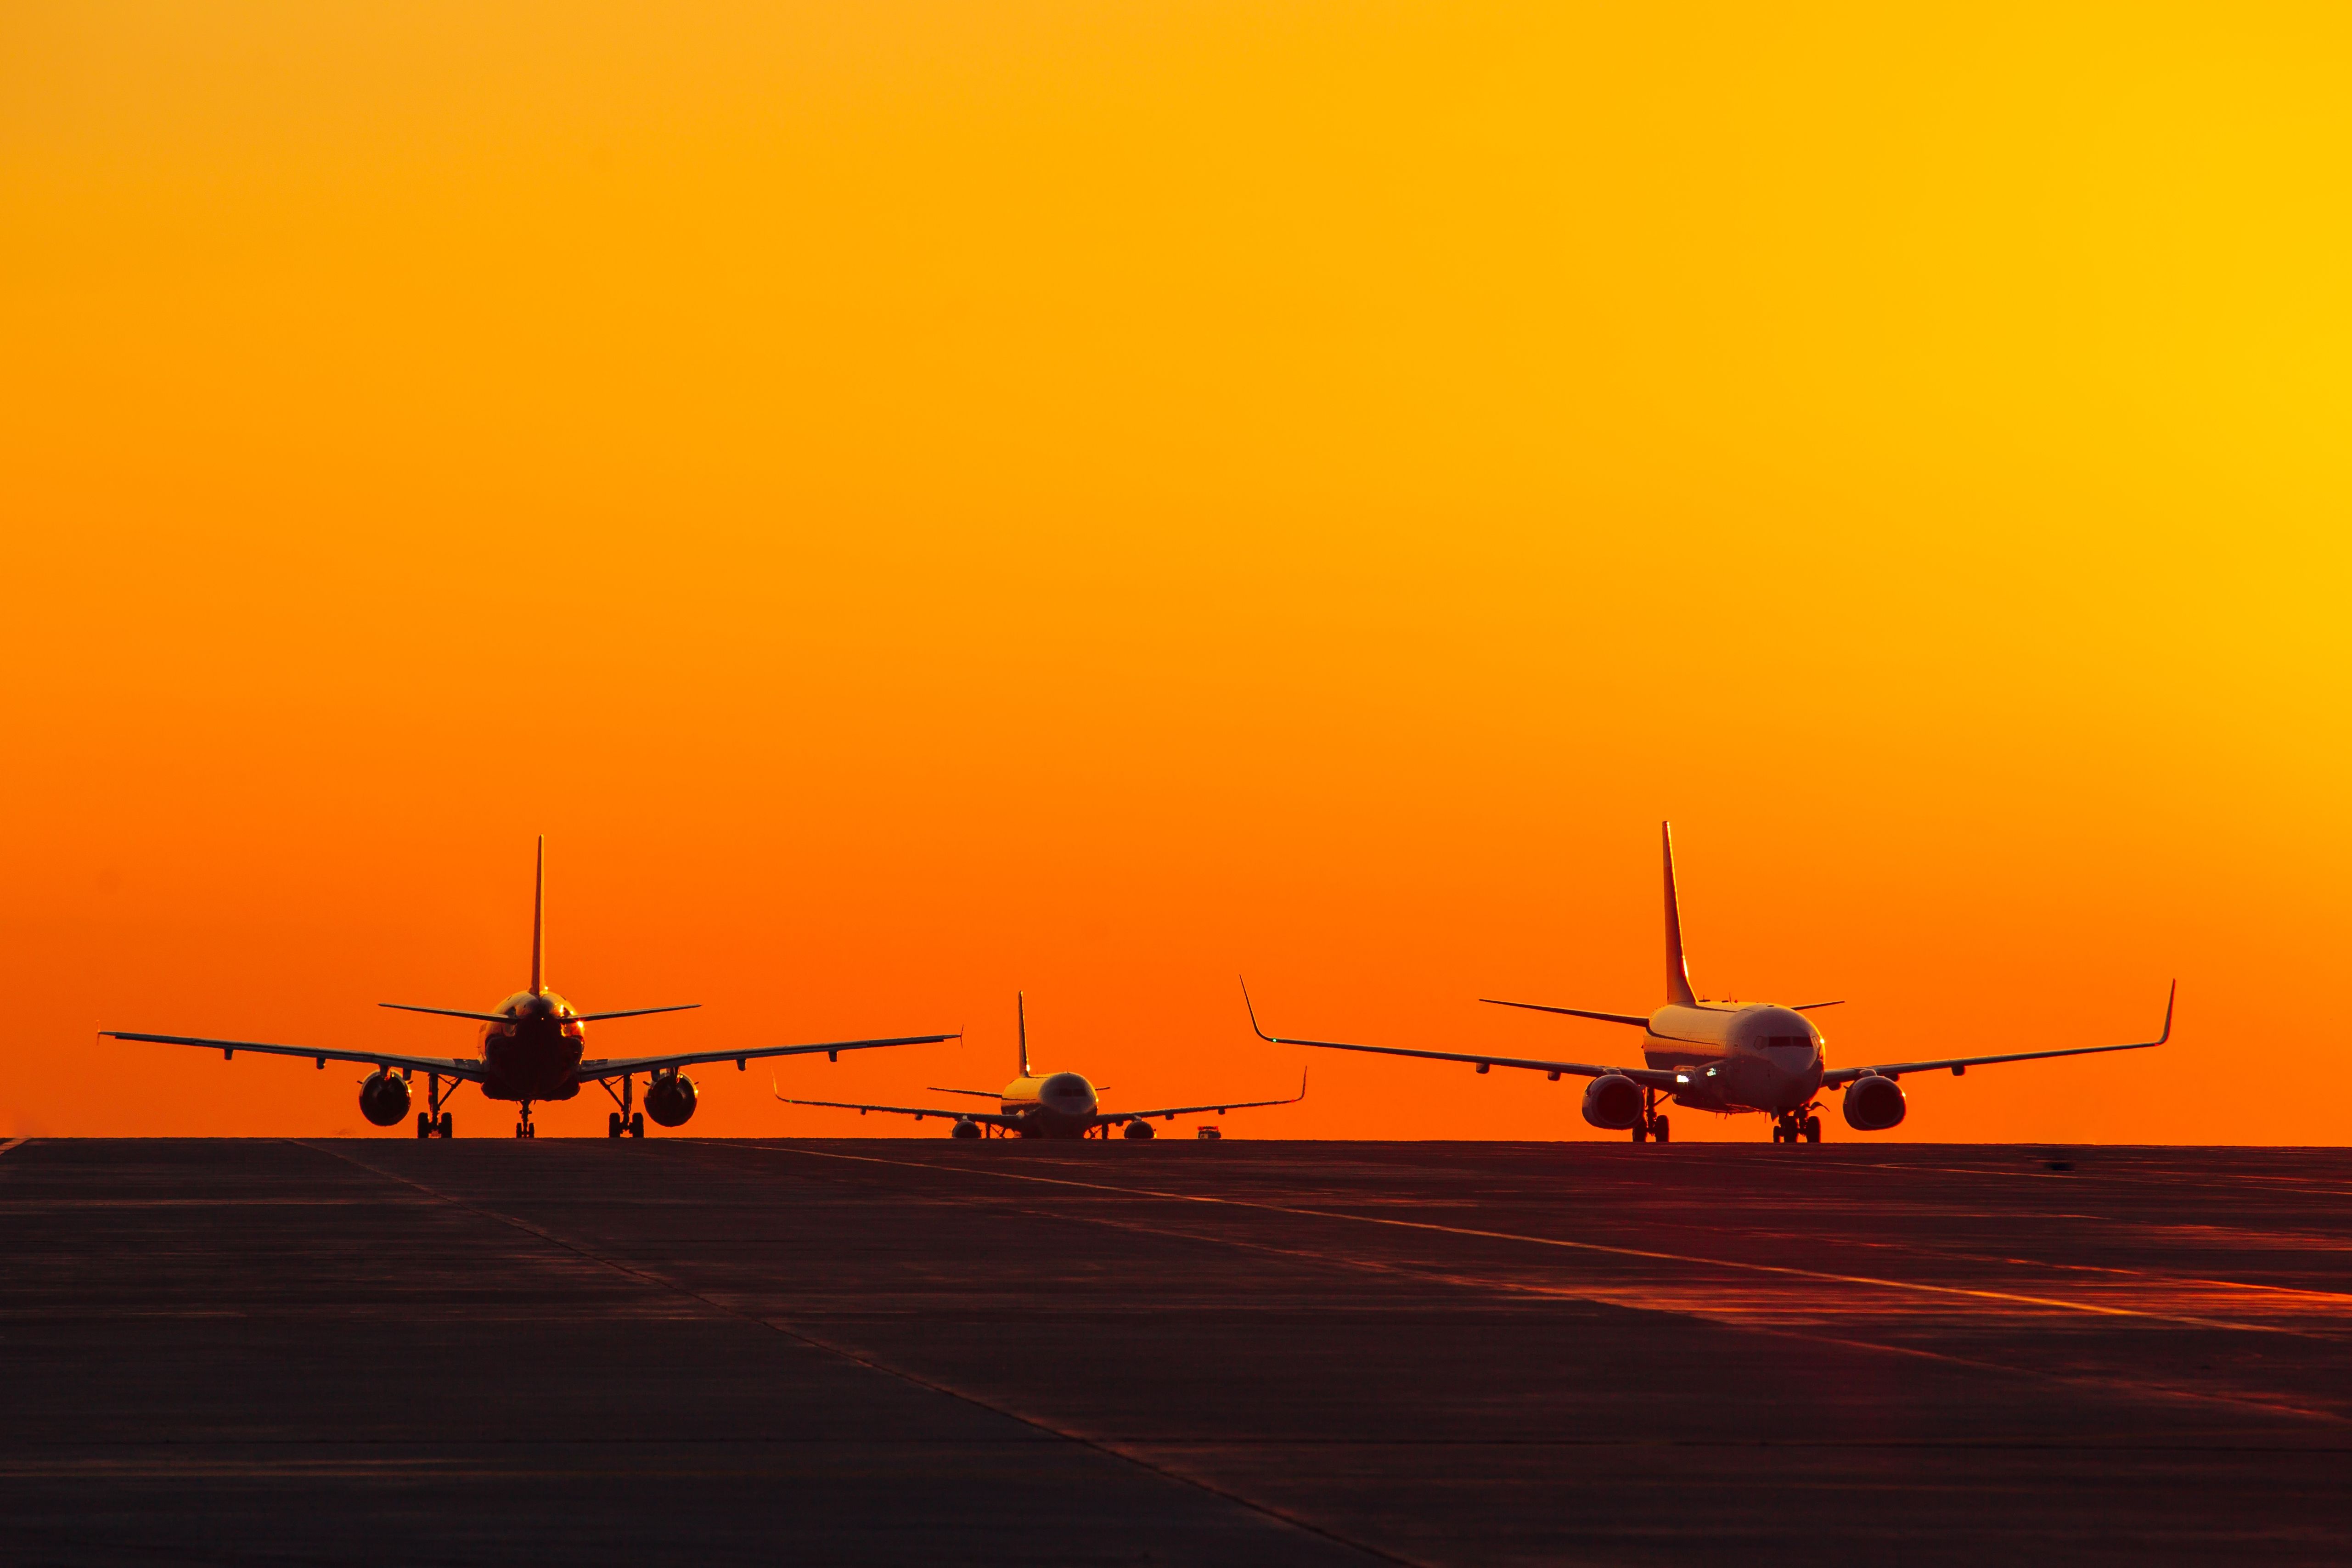 3 aircraft on ground with sunset sky